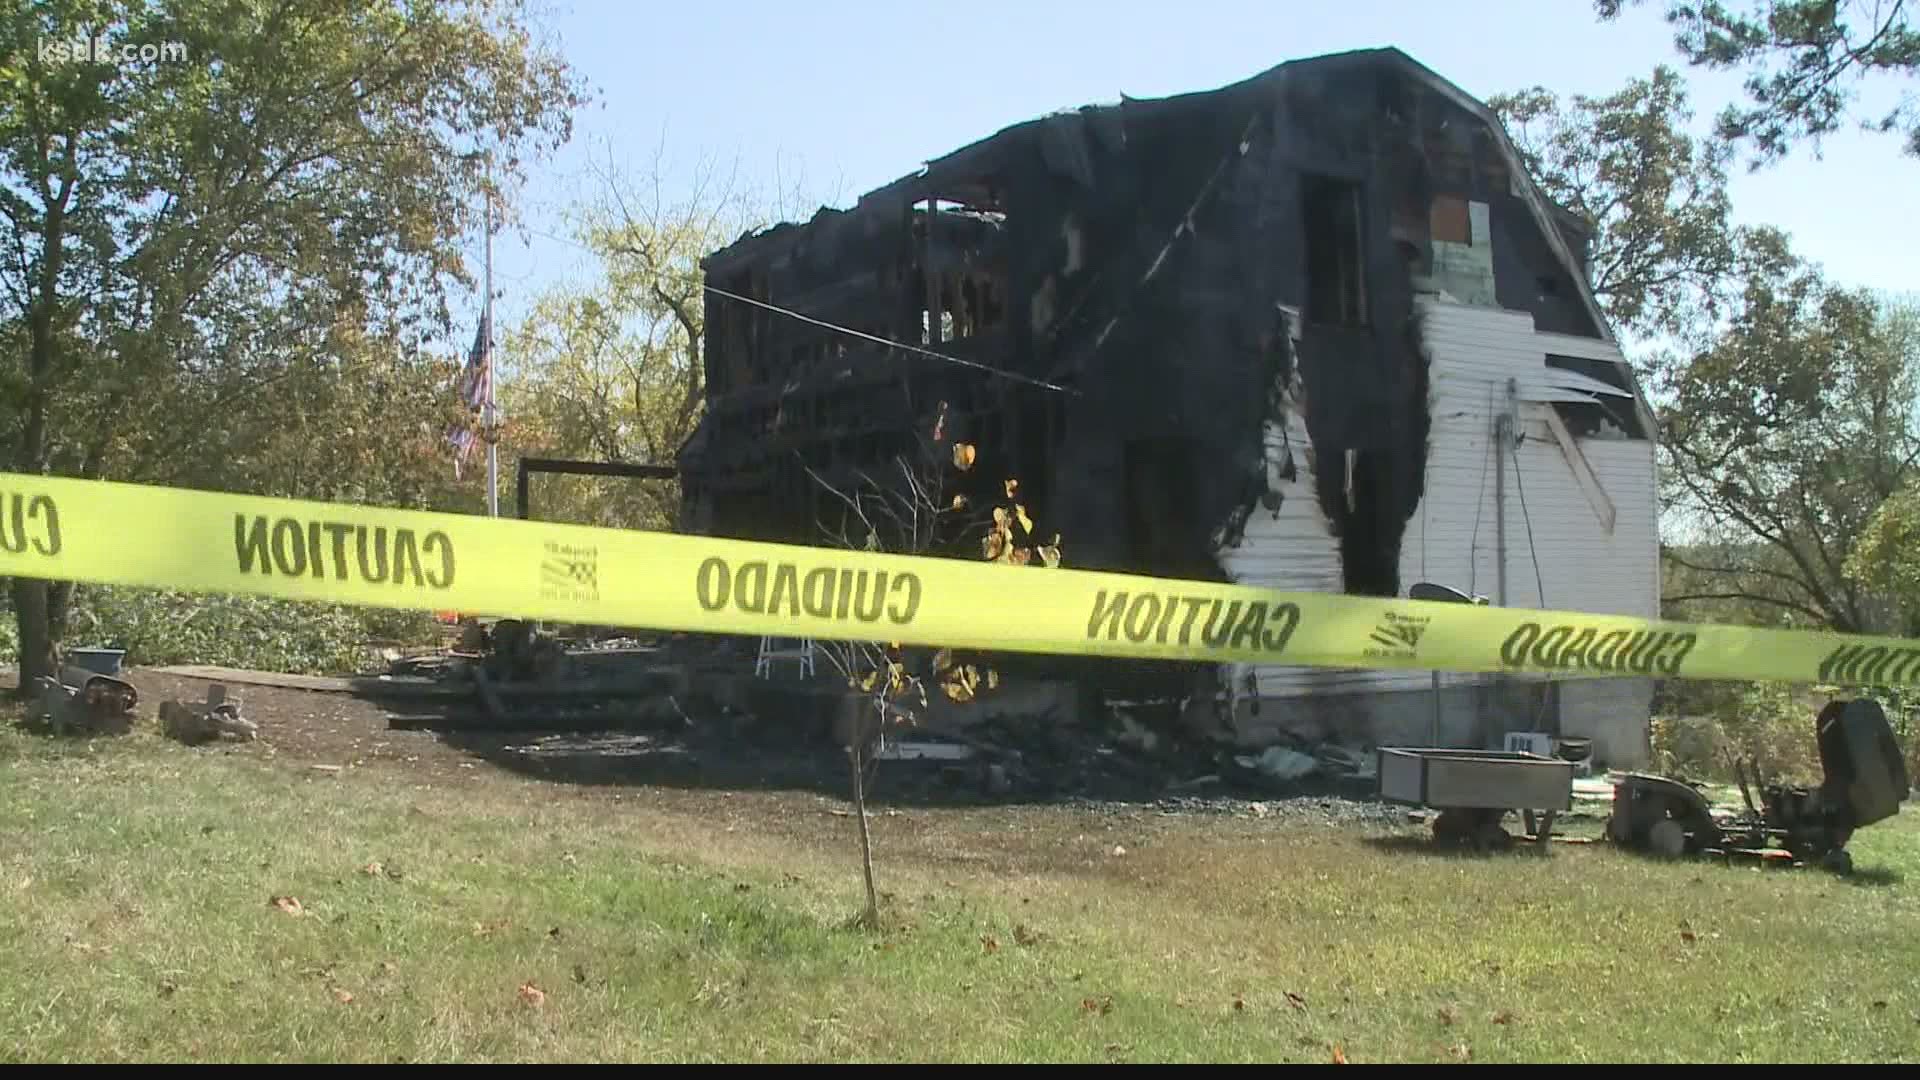 Two of the surviving residents of the home were transported to a local hospital with extensive burns